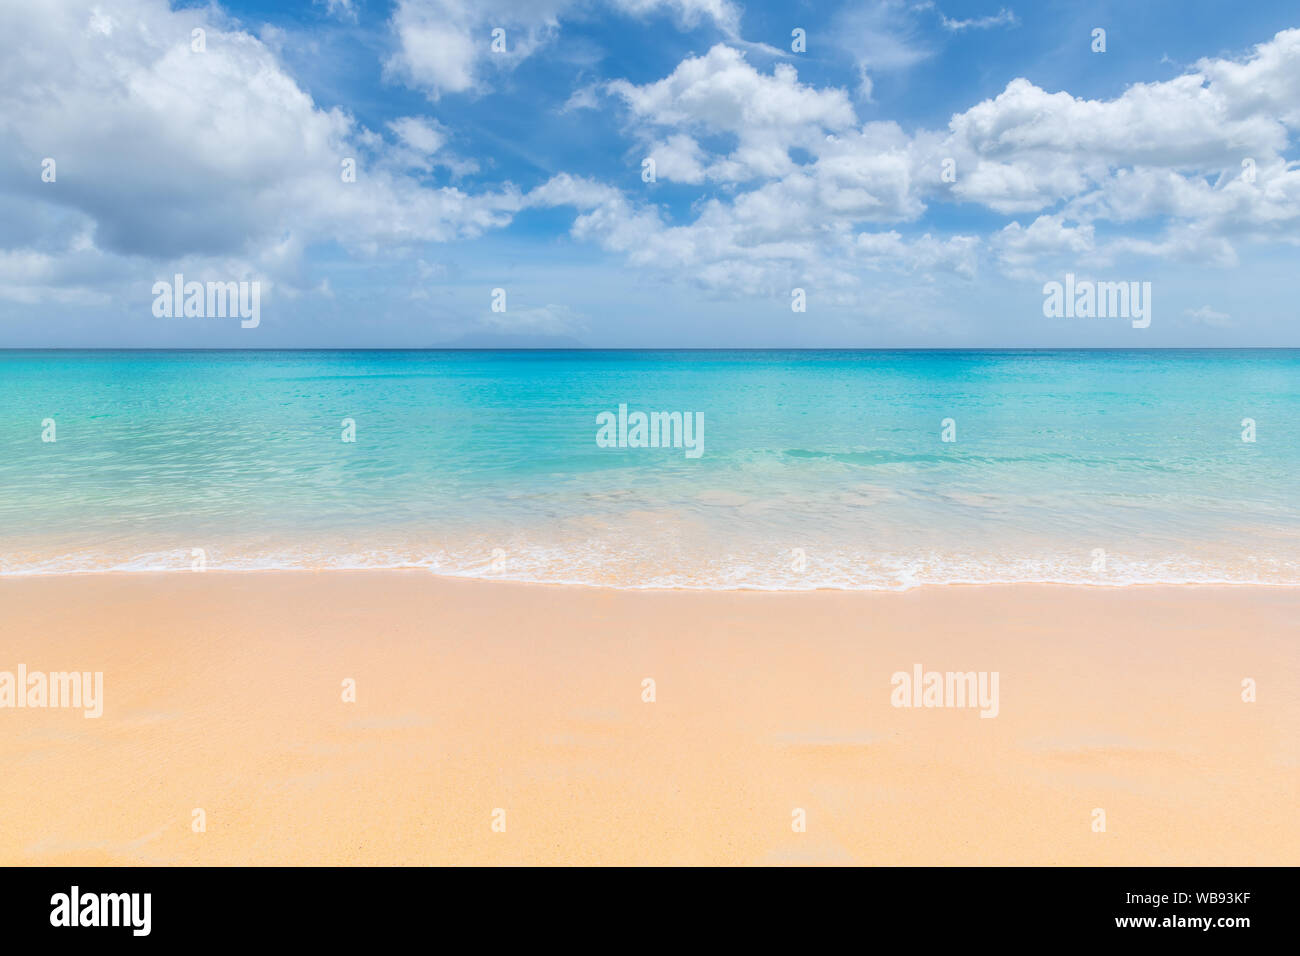 Beautiful clean sandy beach with soft blue ocean wave. Stock Photo